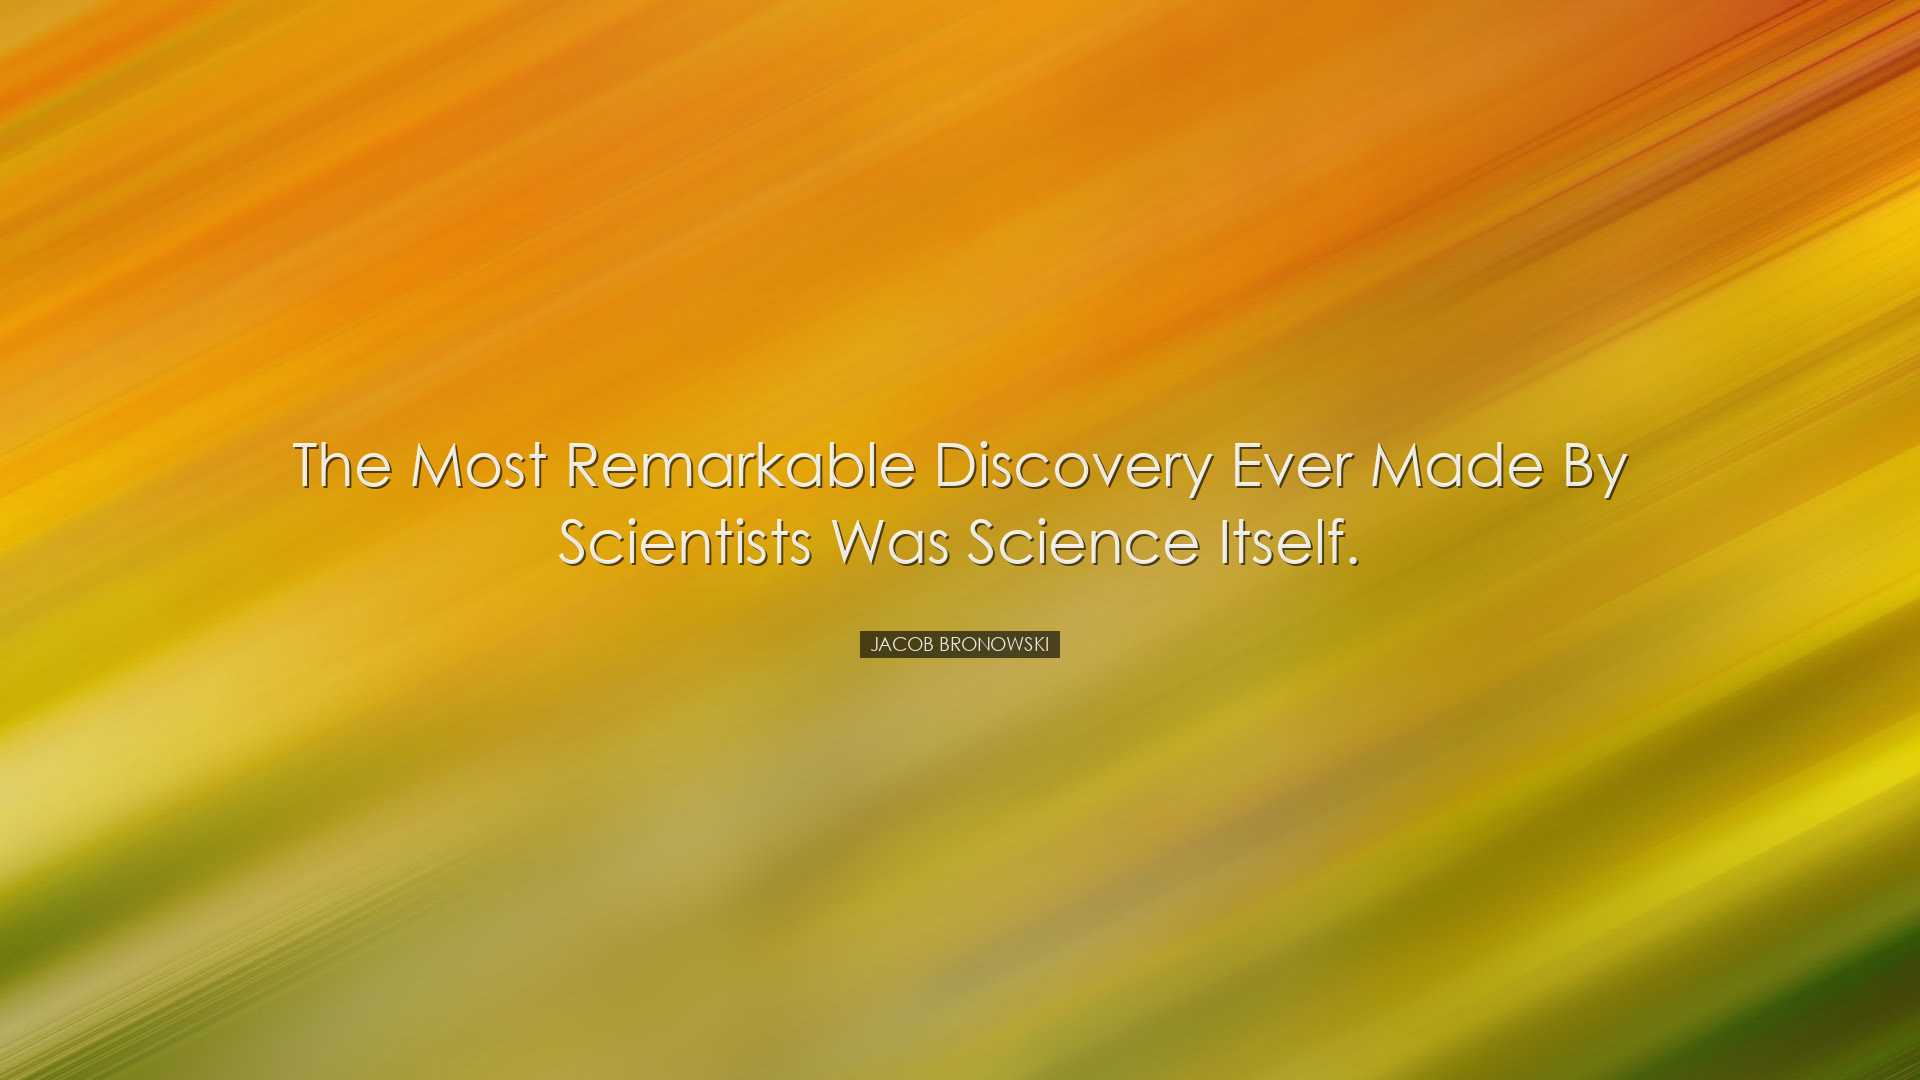 The most remarkable discovery ever made by scientists was science